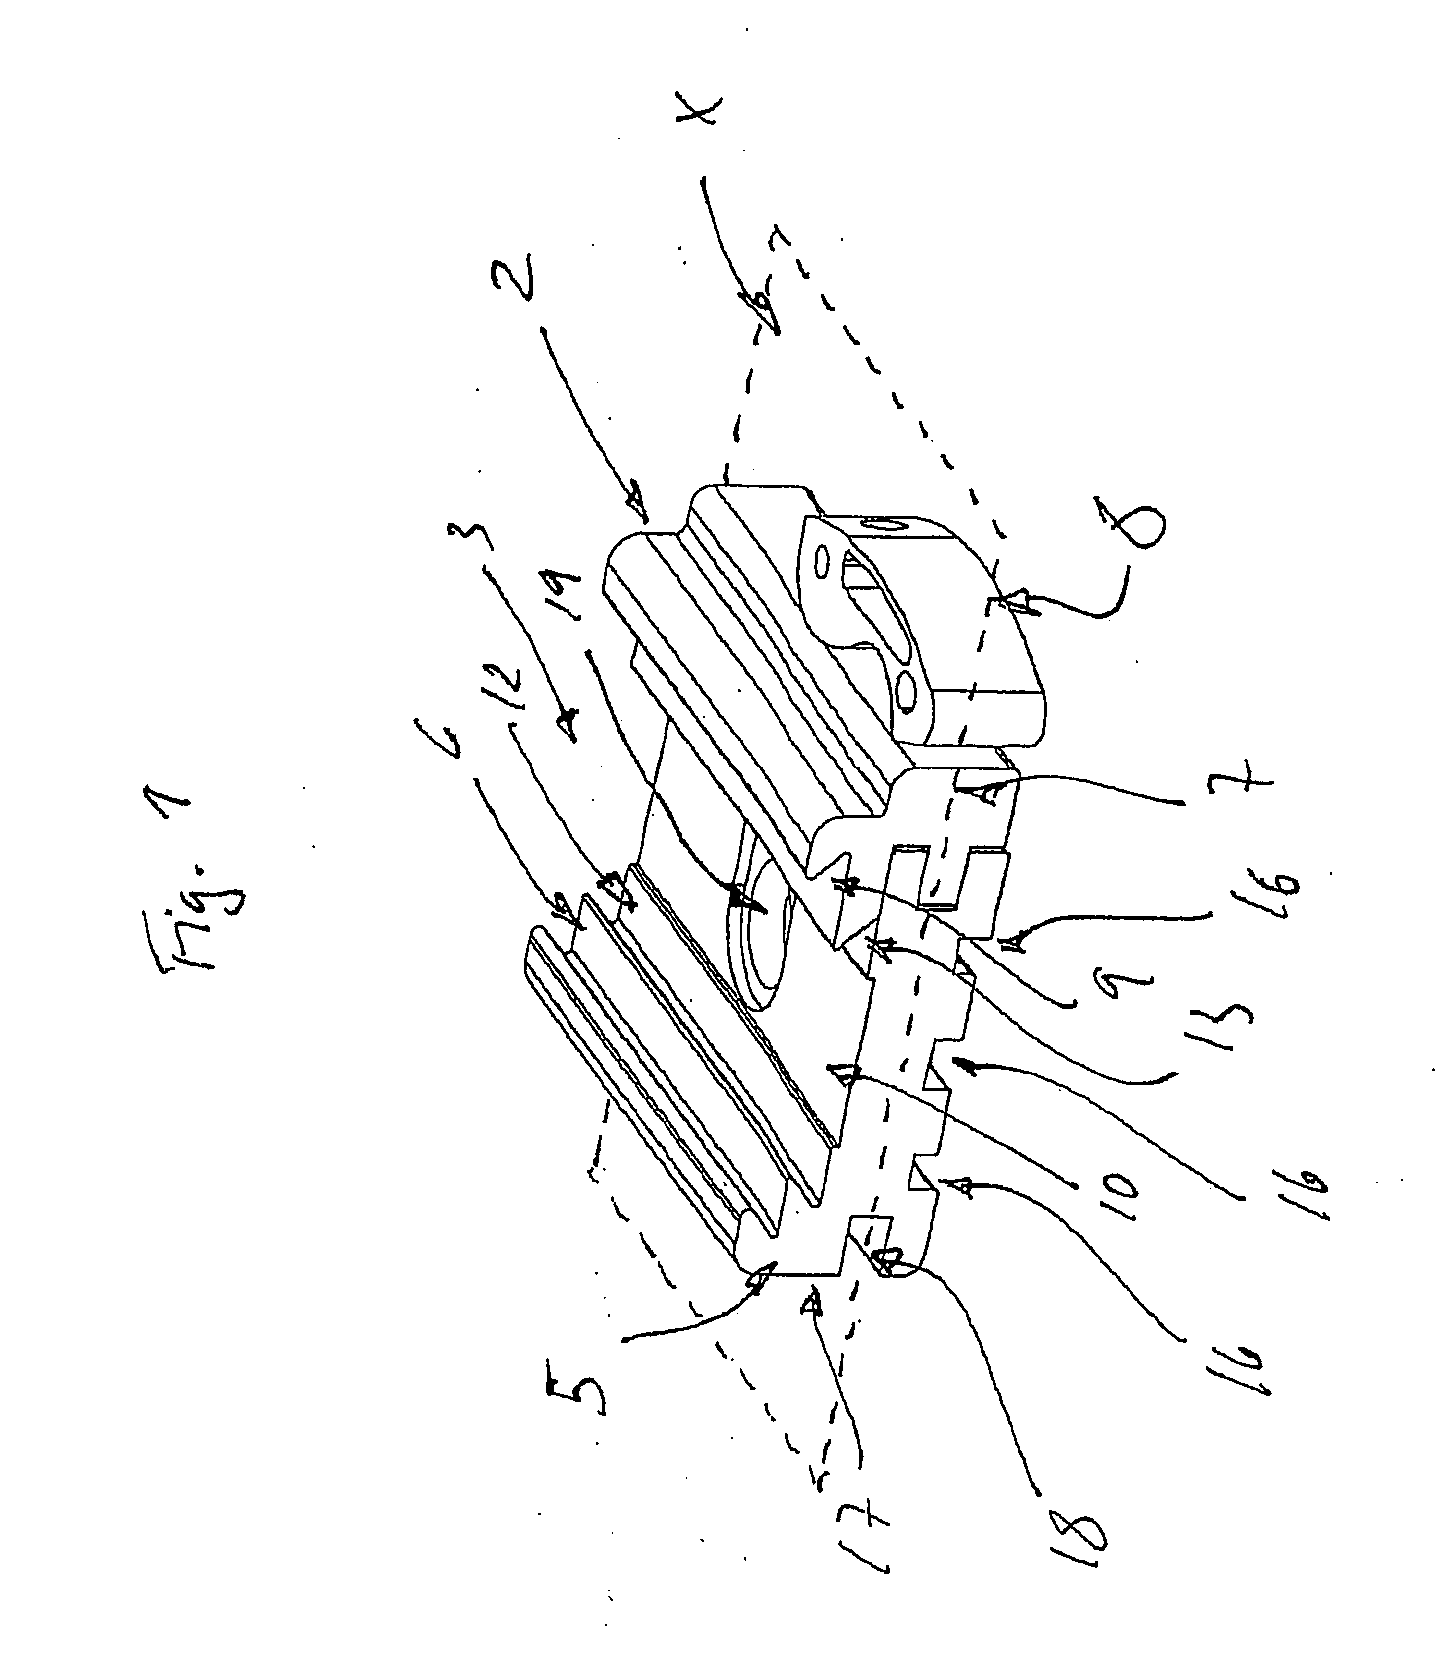 Mounting arrangement for optical devices